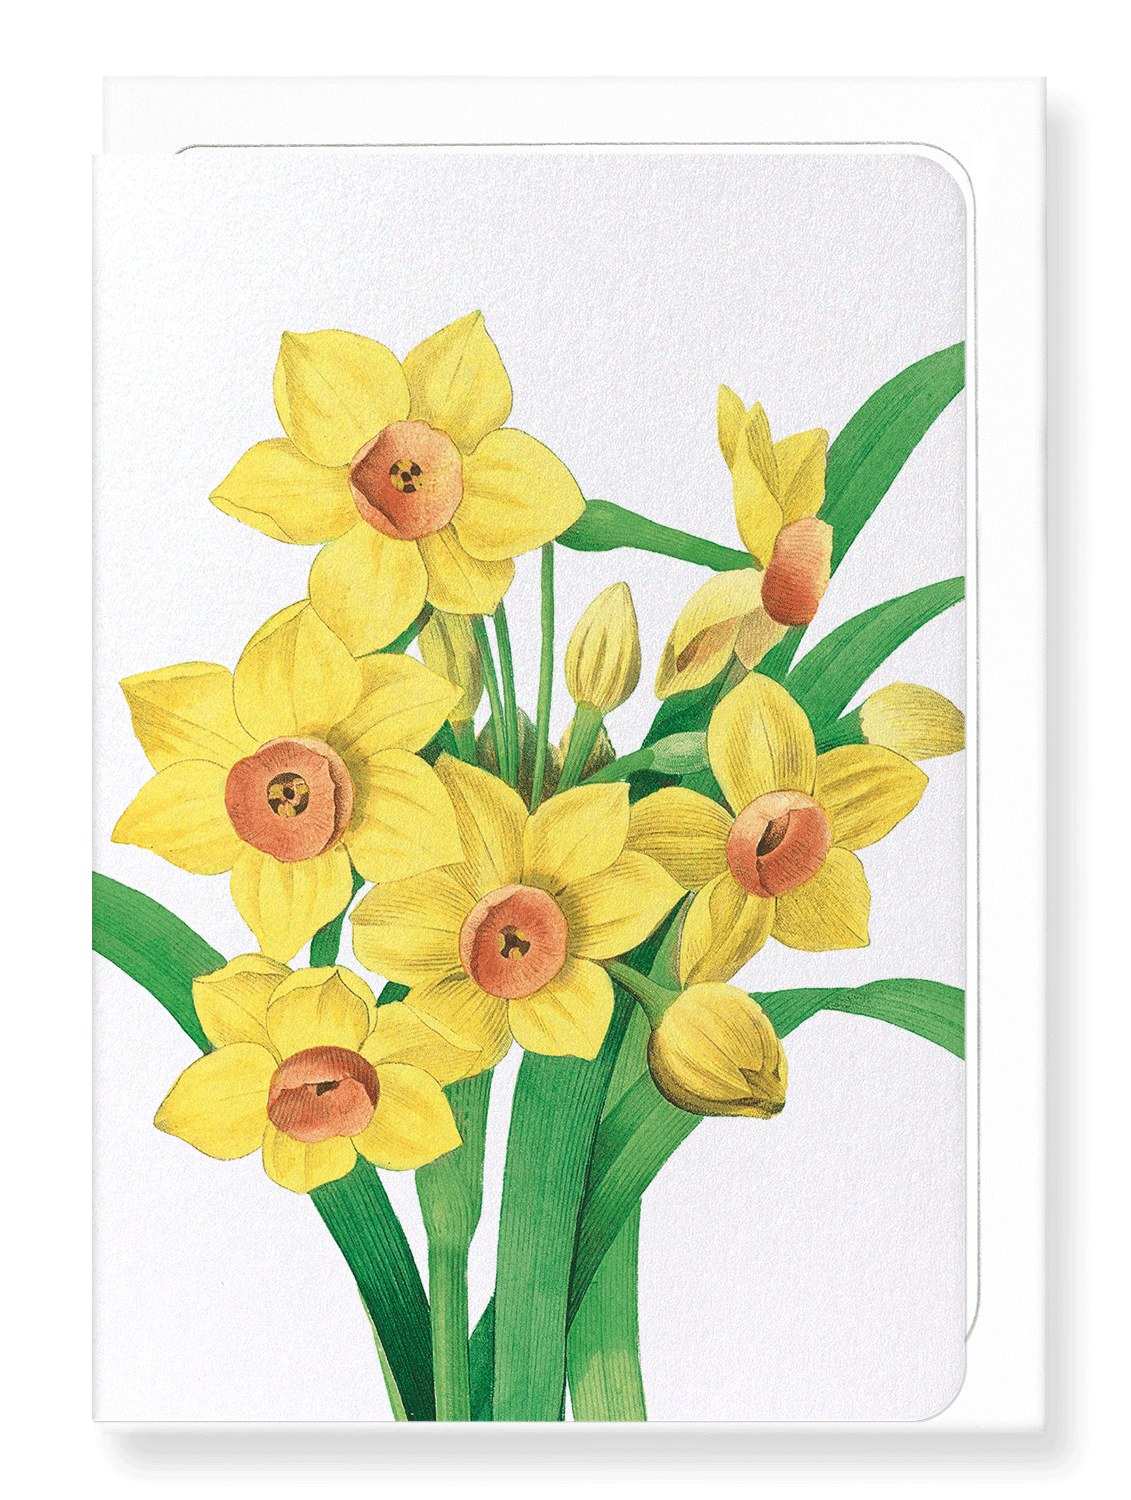 Ezen Designs - Daffodil (detail) - Greeting Card - Front